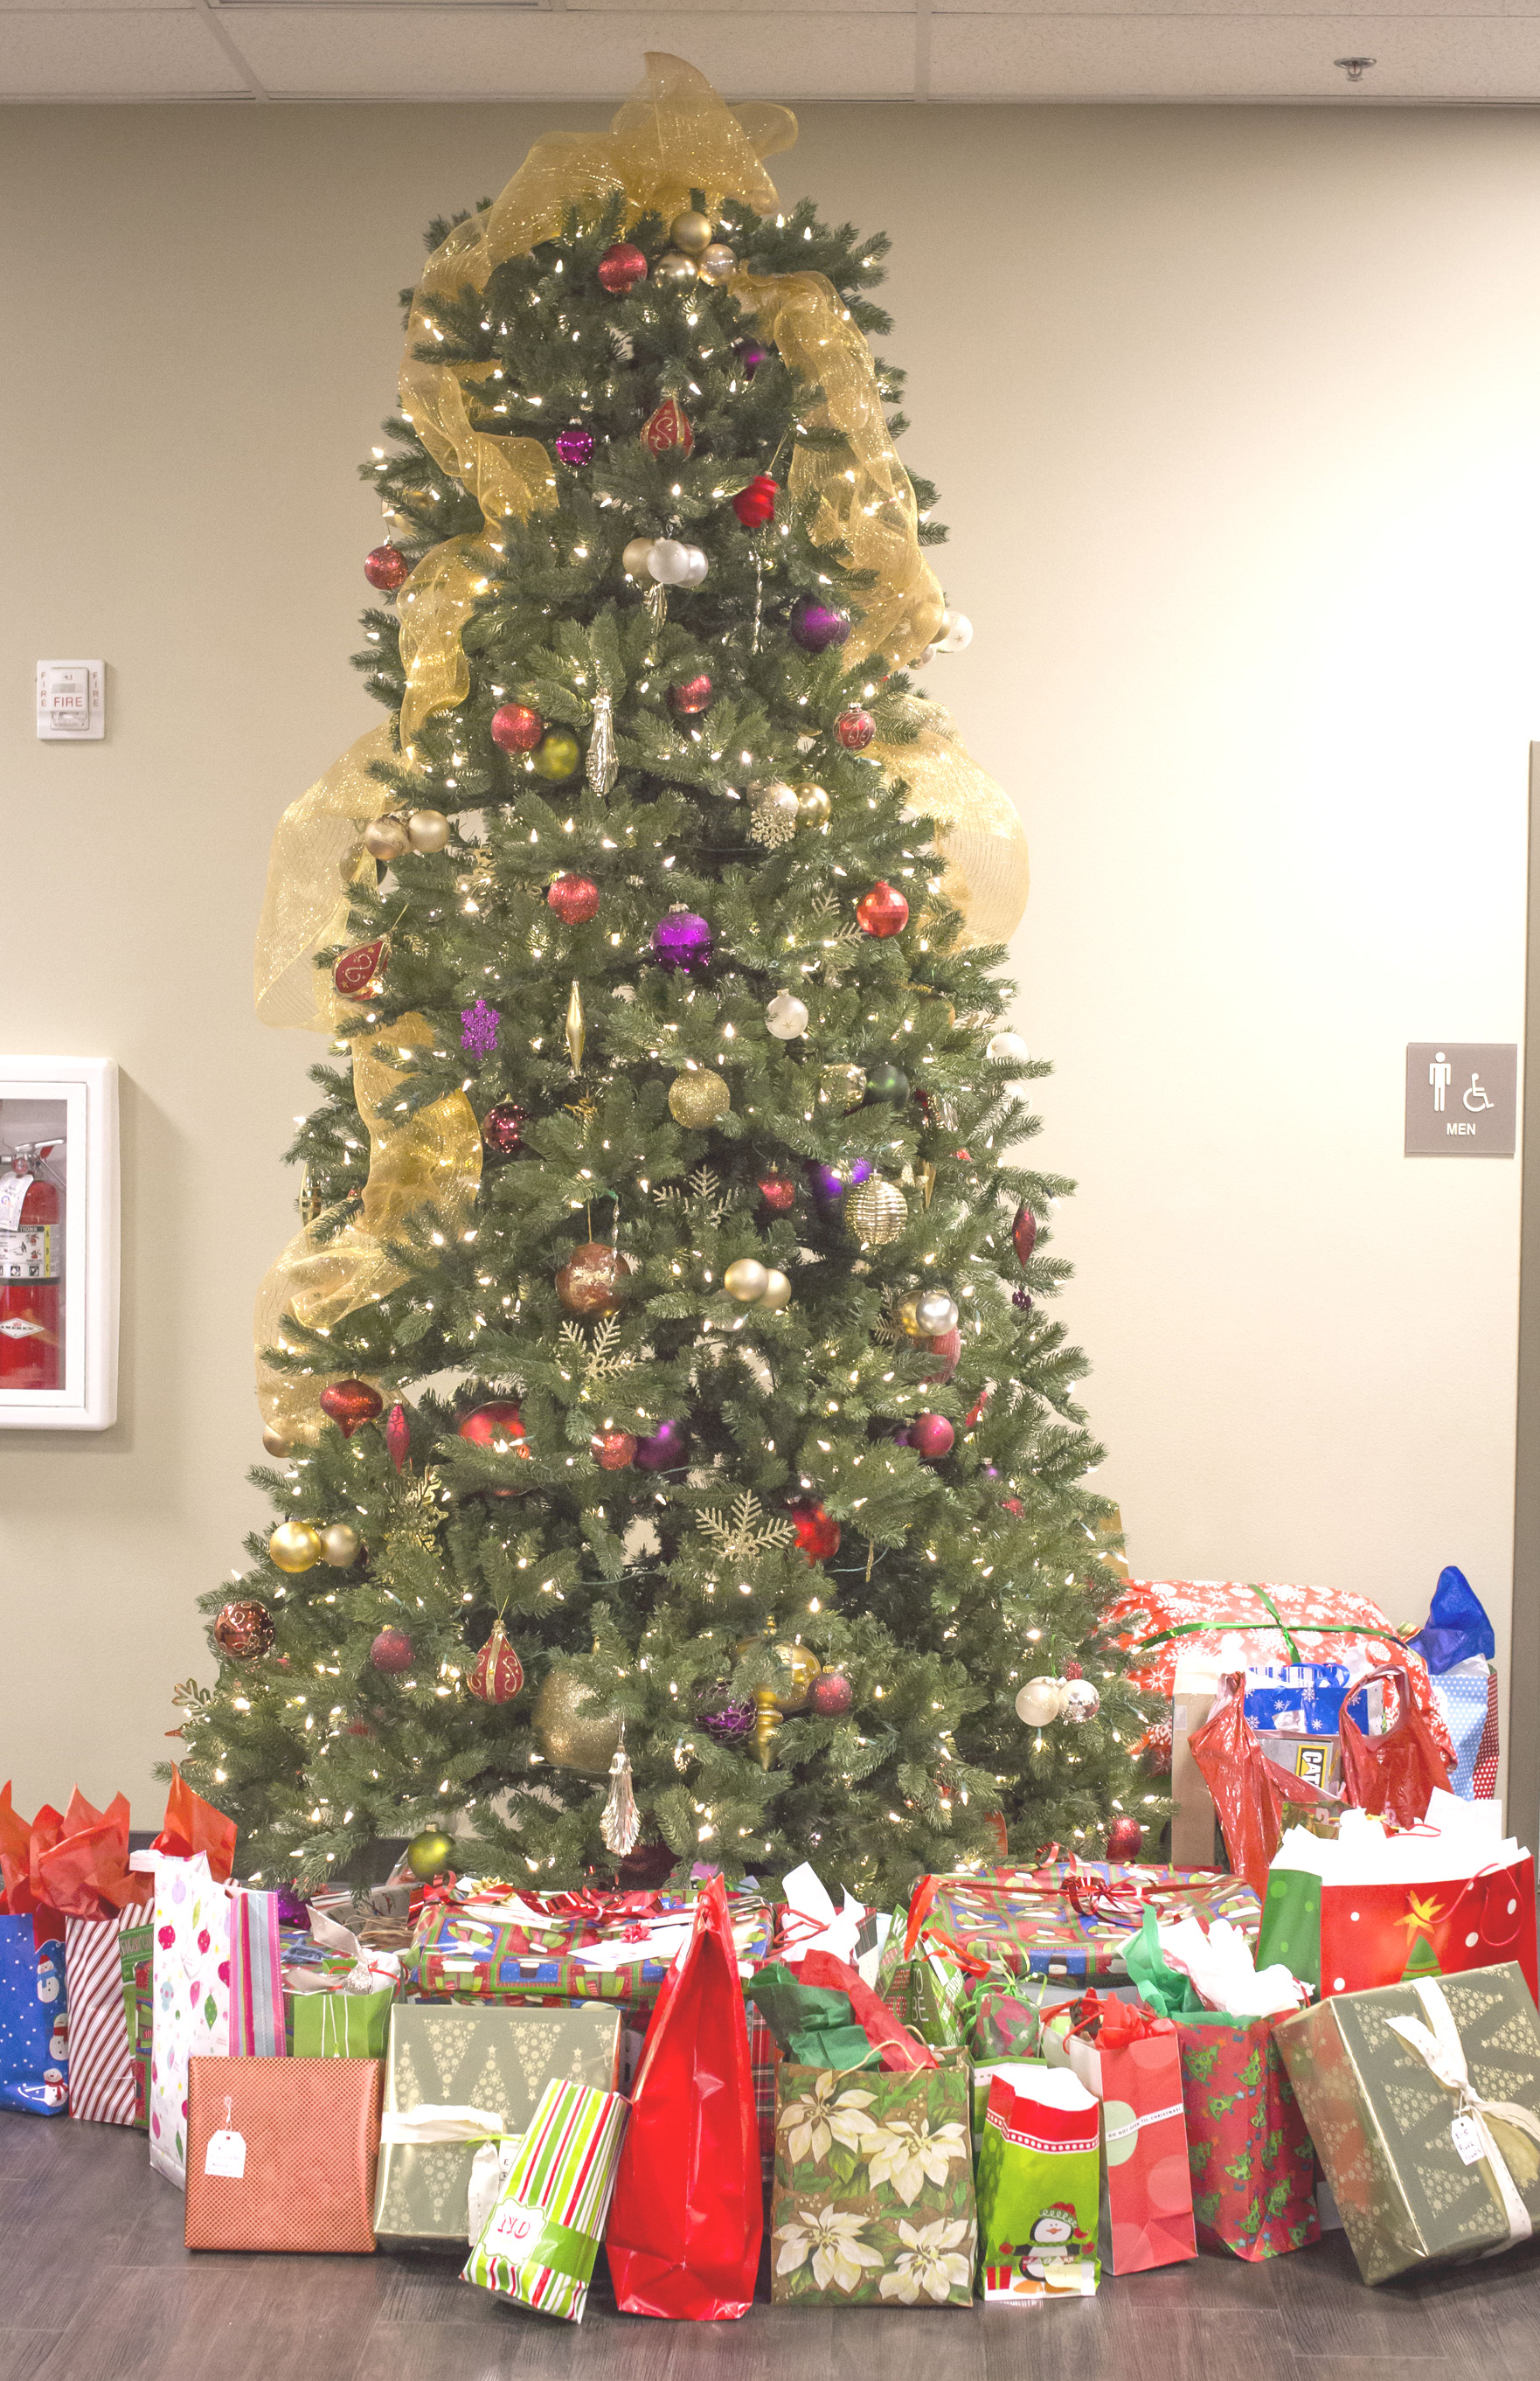 PRESENTS for needy families collected at Northgate church. Courtesy photos